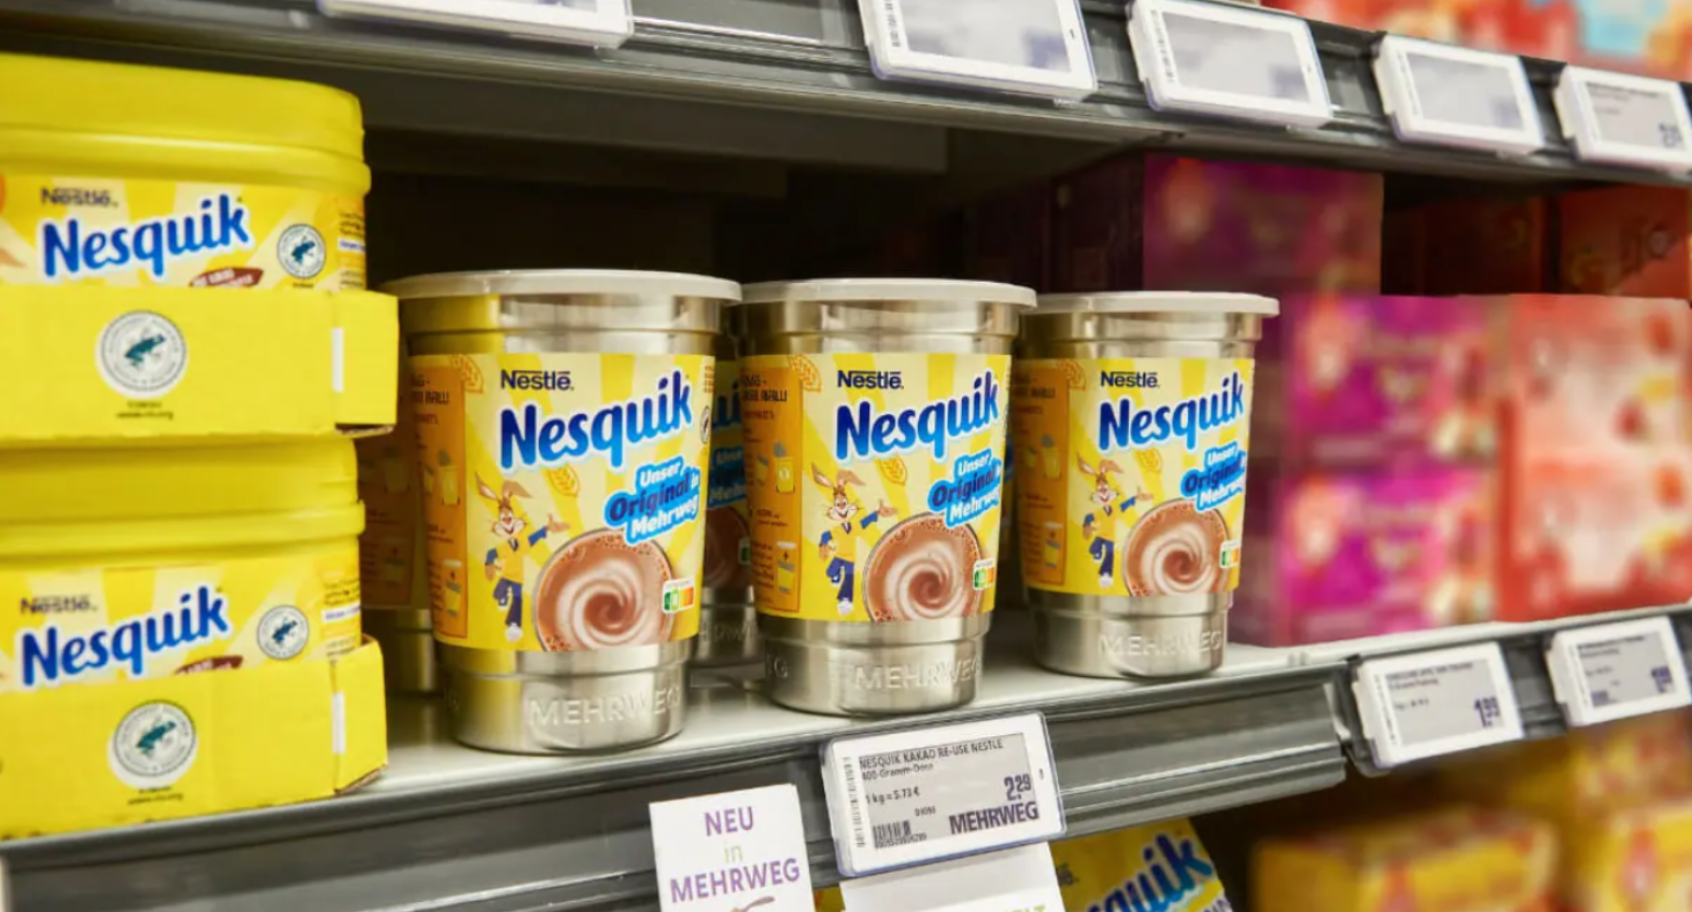 Nestlé trials reusable steel containers for Nesquick in Germany credit Nestlé Germany